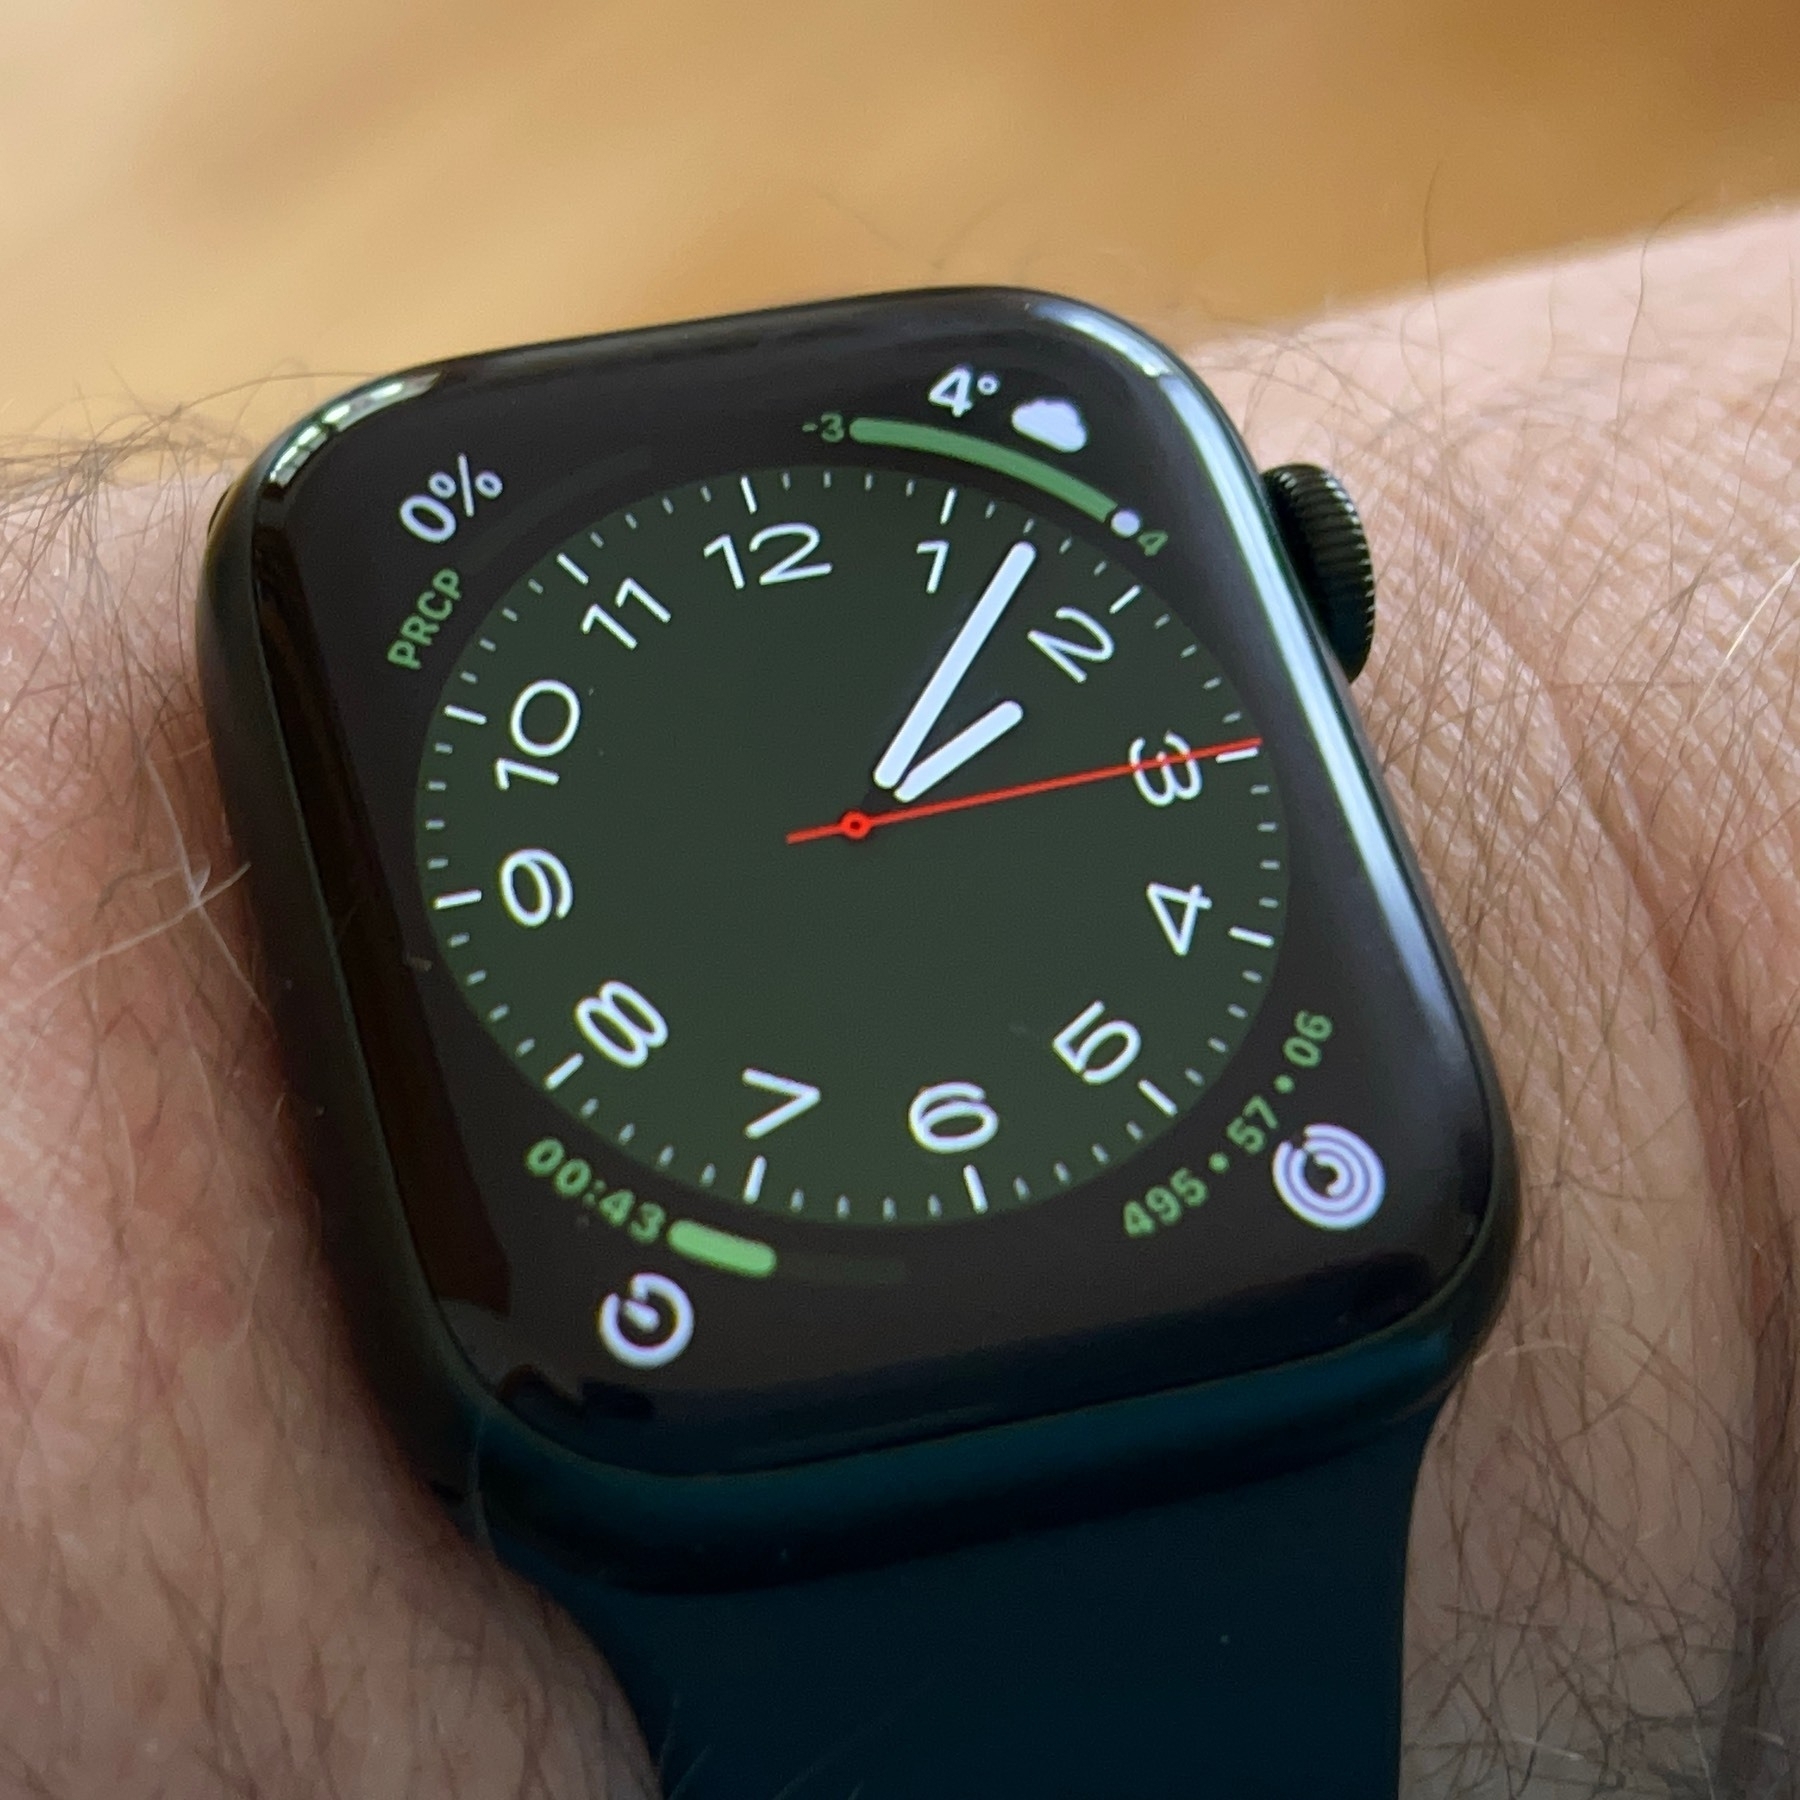 Apple Watch on wrist with an analog watch face with a black background.